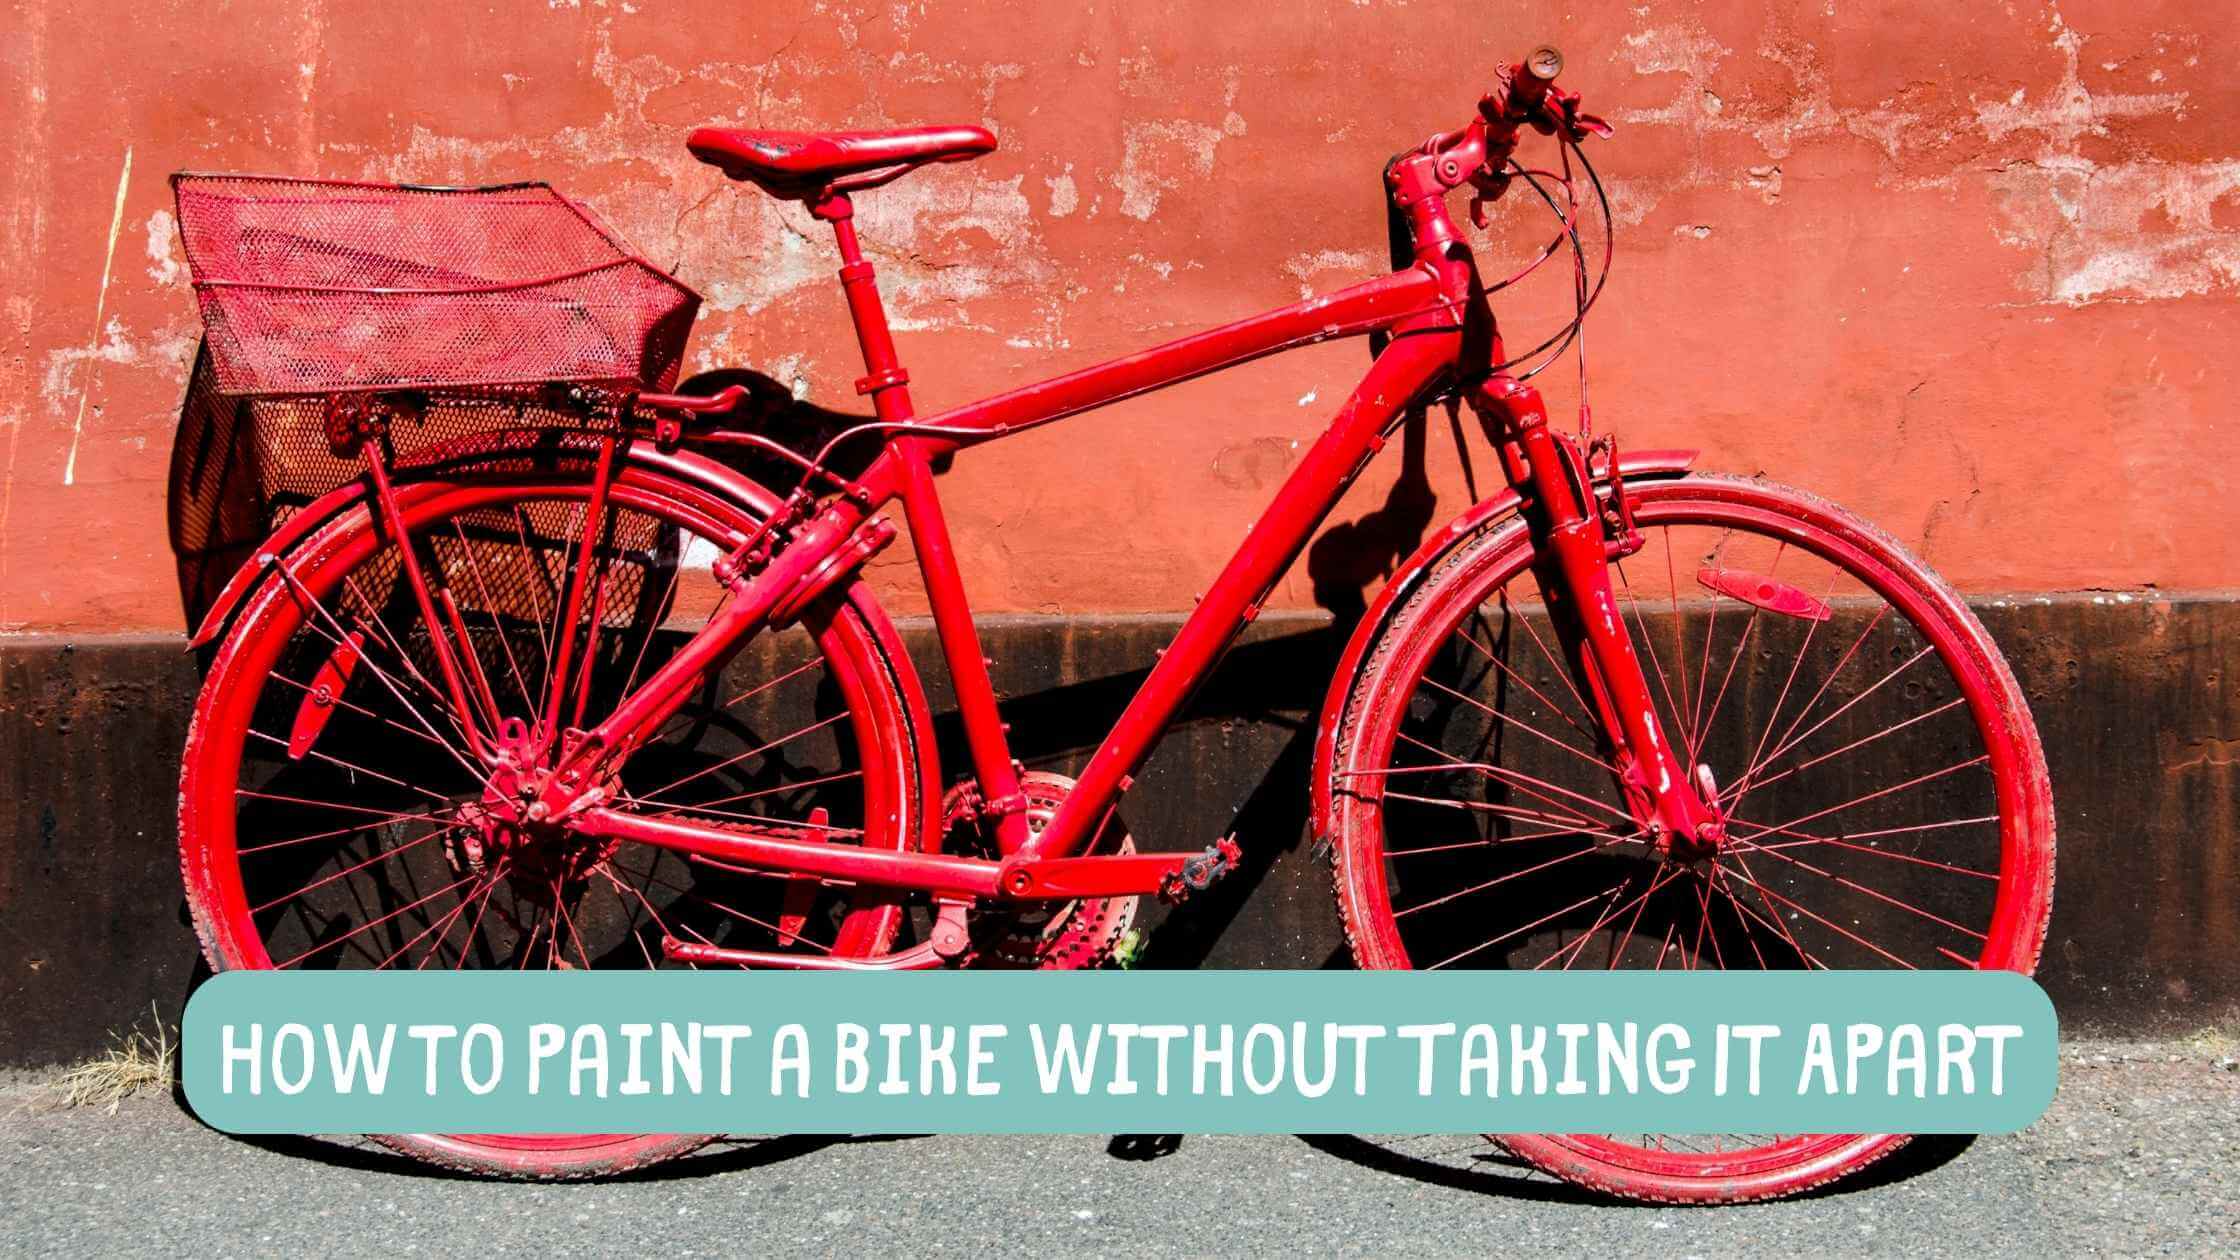 How to Paint a Bike Without Taking It Apart